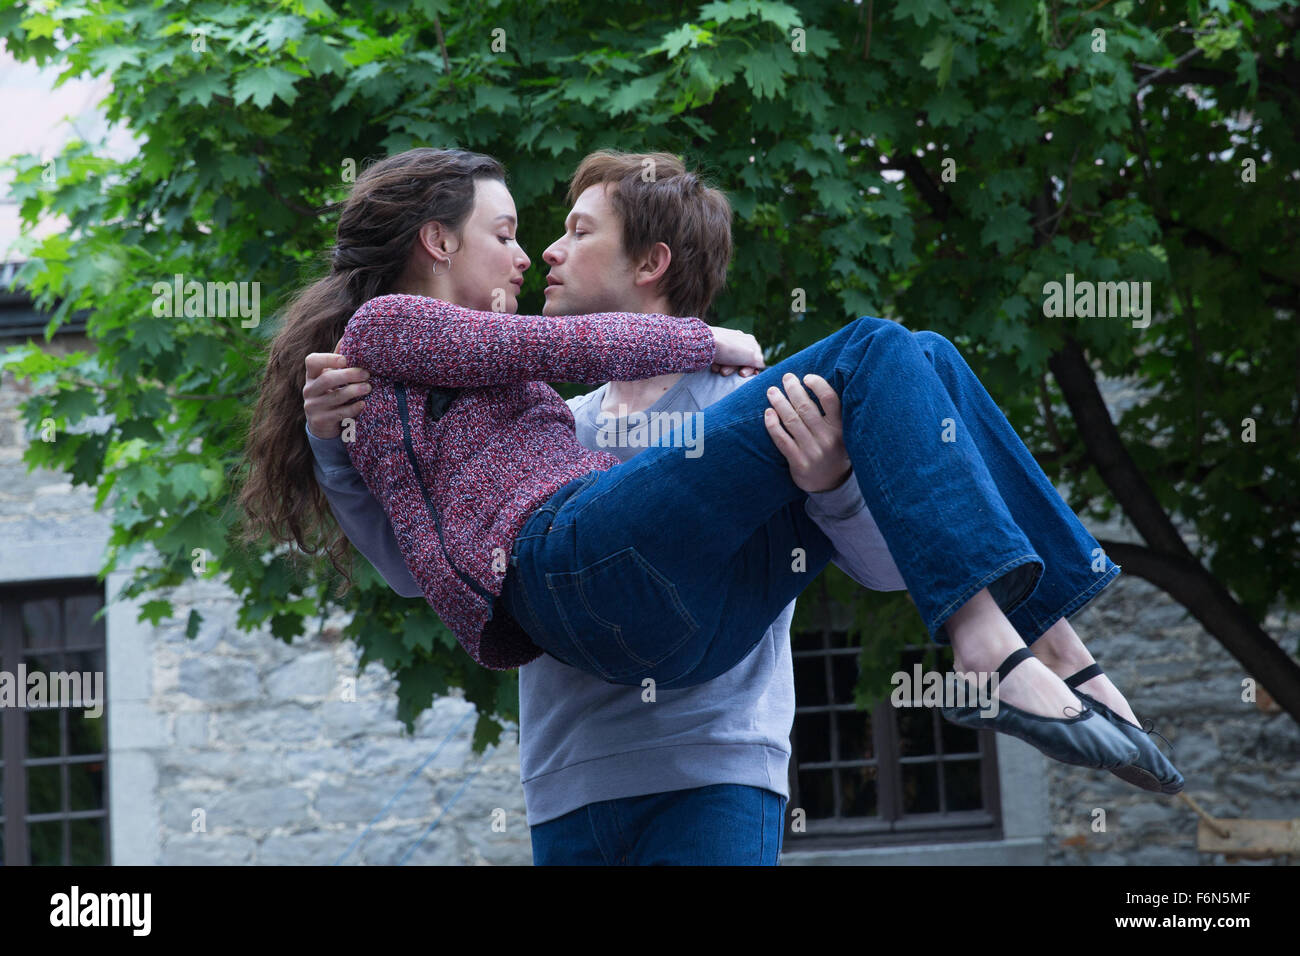 RELEASE DATE: October 2, 2015 TITLE: The Walk STUDIO: Sony Pictures DIRECTOR: Robert Zemeckis PLOT: Story of French high-wire artist Philippe Petit's 1974 attempt to cross the Twin Towers of World Trade Center PICTURED: CHARLOTTE LE BON, JOSEPH GORDON-LEVITT as Philippe Petit (Credit: c Sony Pictures/Entertainment Pictures) Stock Photo